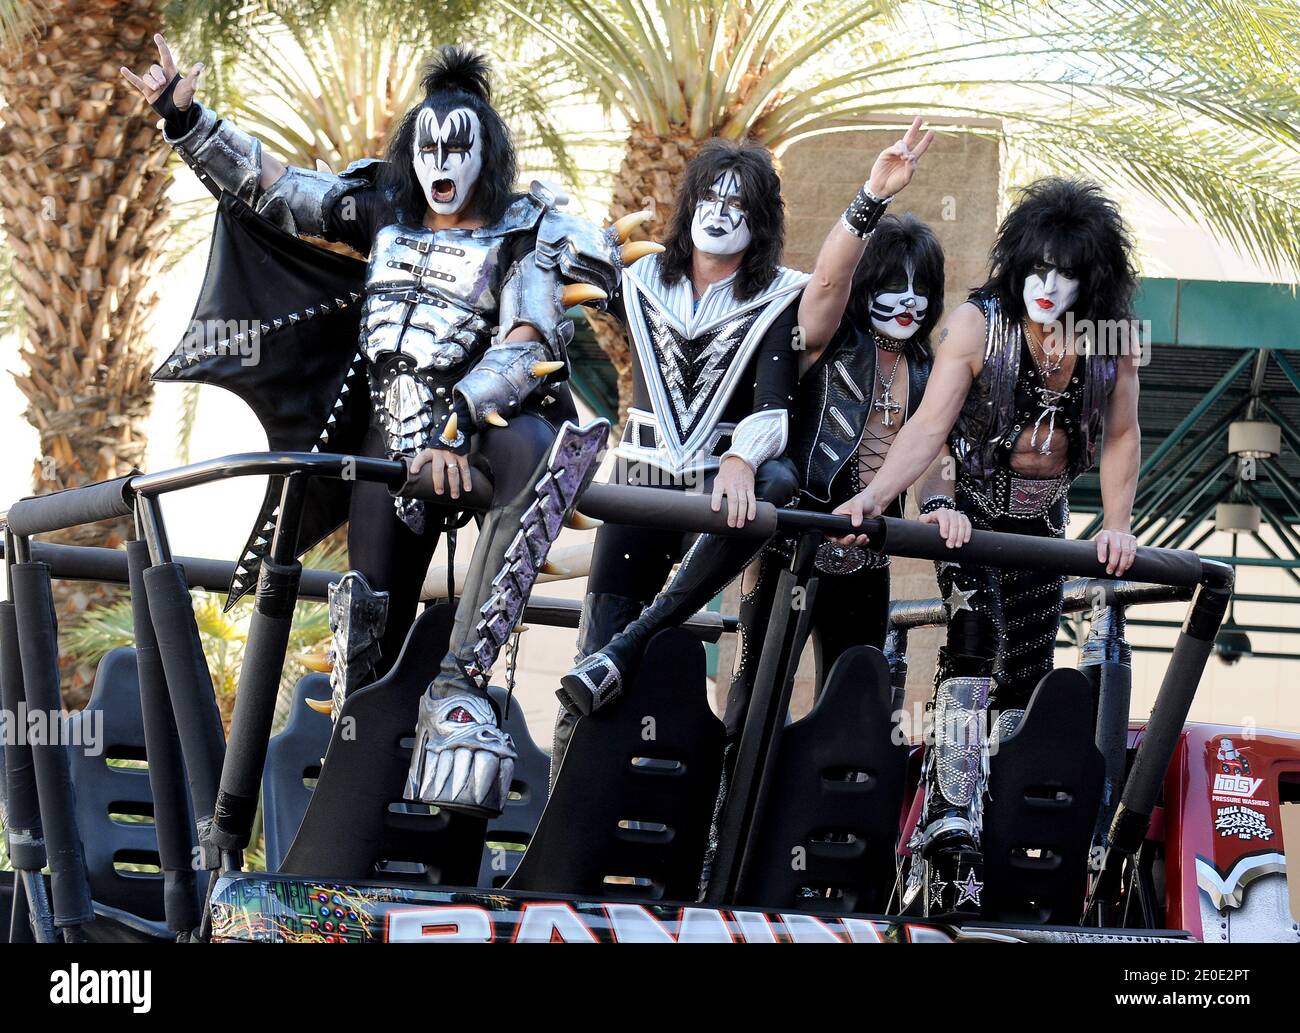 Gene Simmons, Eric Singer, Tommy Thayer and Paul Stanley of the rock band Kiss arrive at the 47th Annual Academy Of Country Music Awards held at the MGM Grand Garden Arena in Las Vegas, Nevada, USA on April 1, 2012. Photo by Lionel Hahn/ABACAPRESS.COM Stock Photo